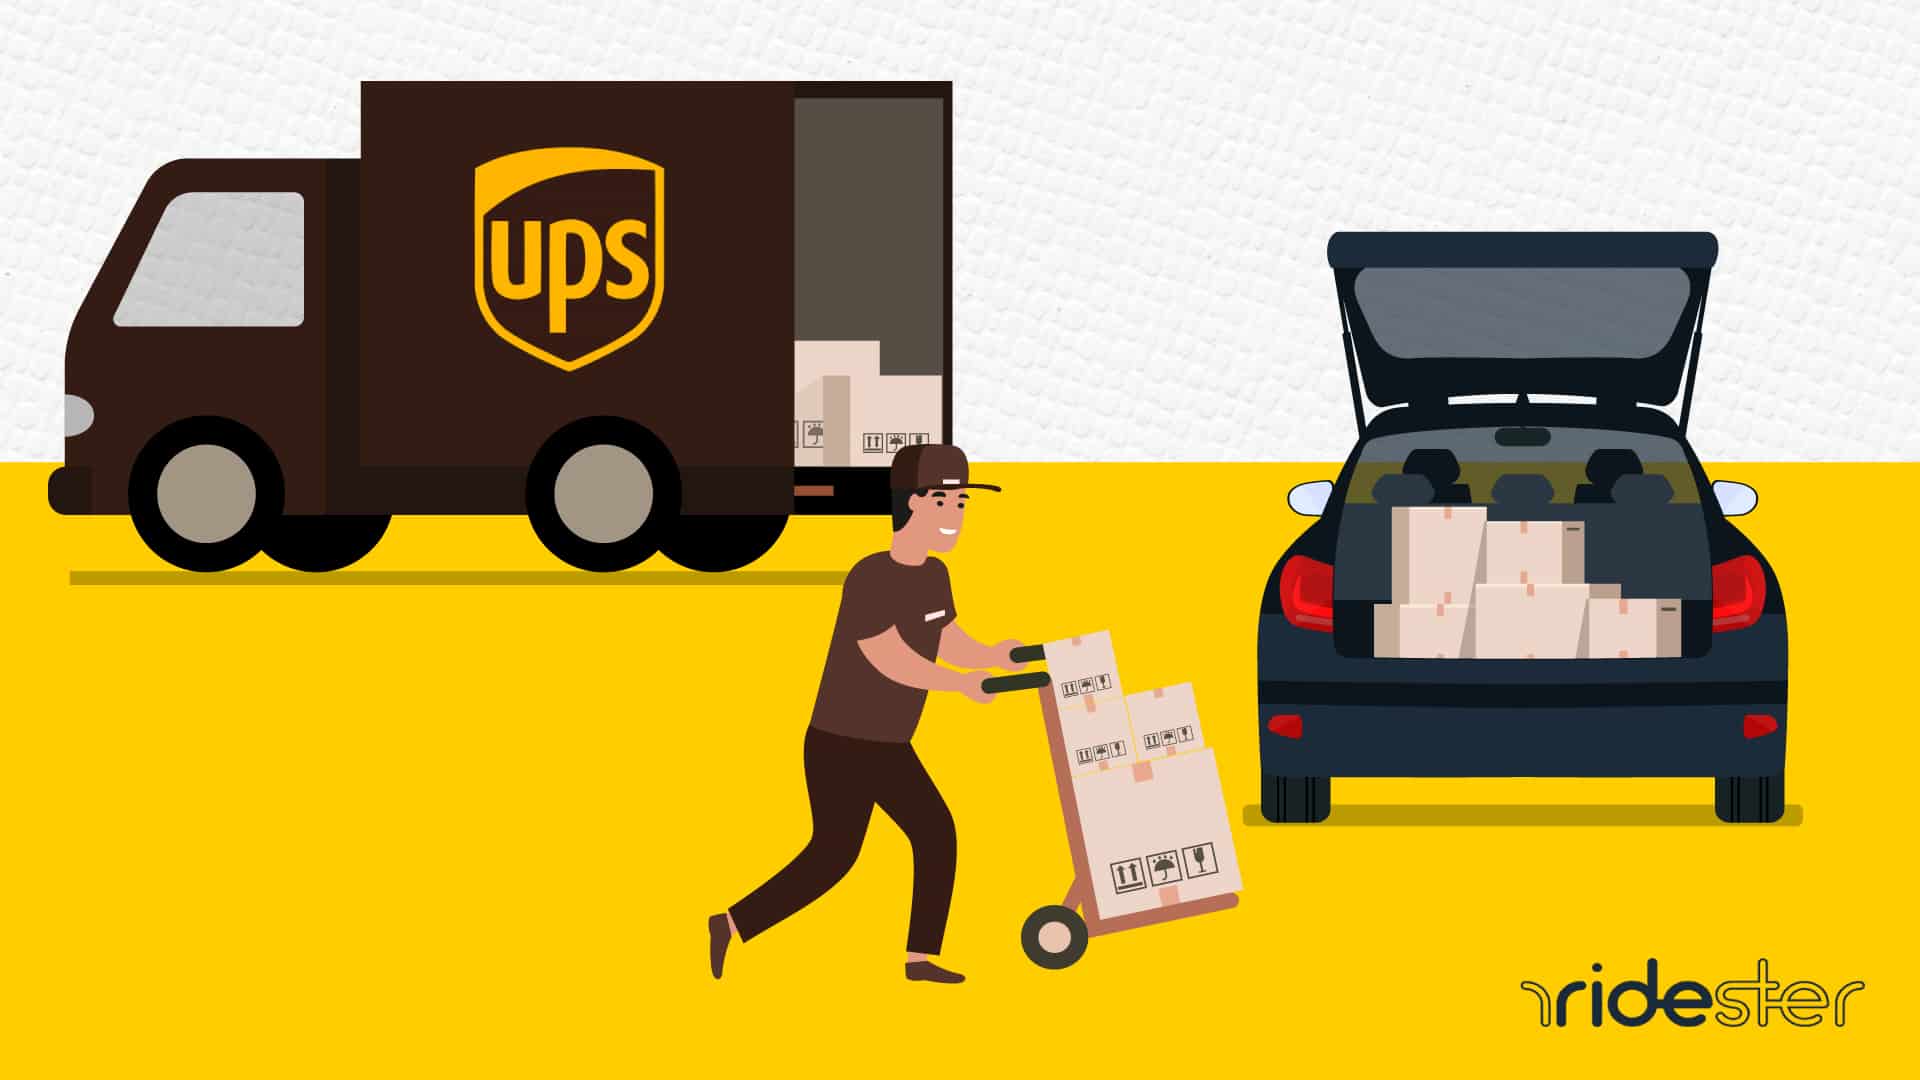 Deliver with Reliability: Get to Know the Role of an UPS Delivery Driver